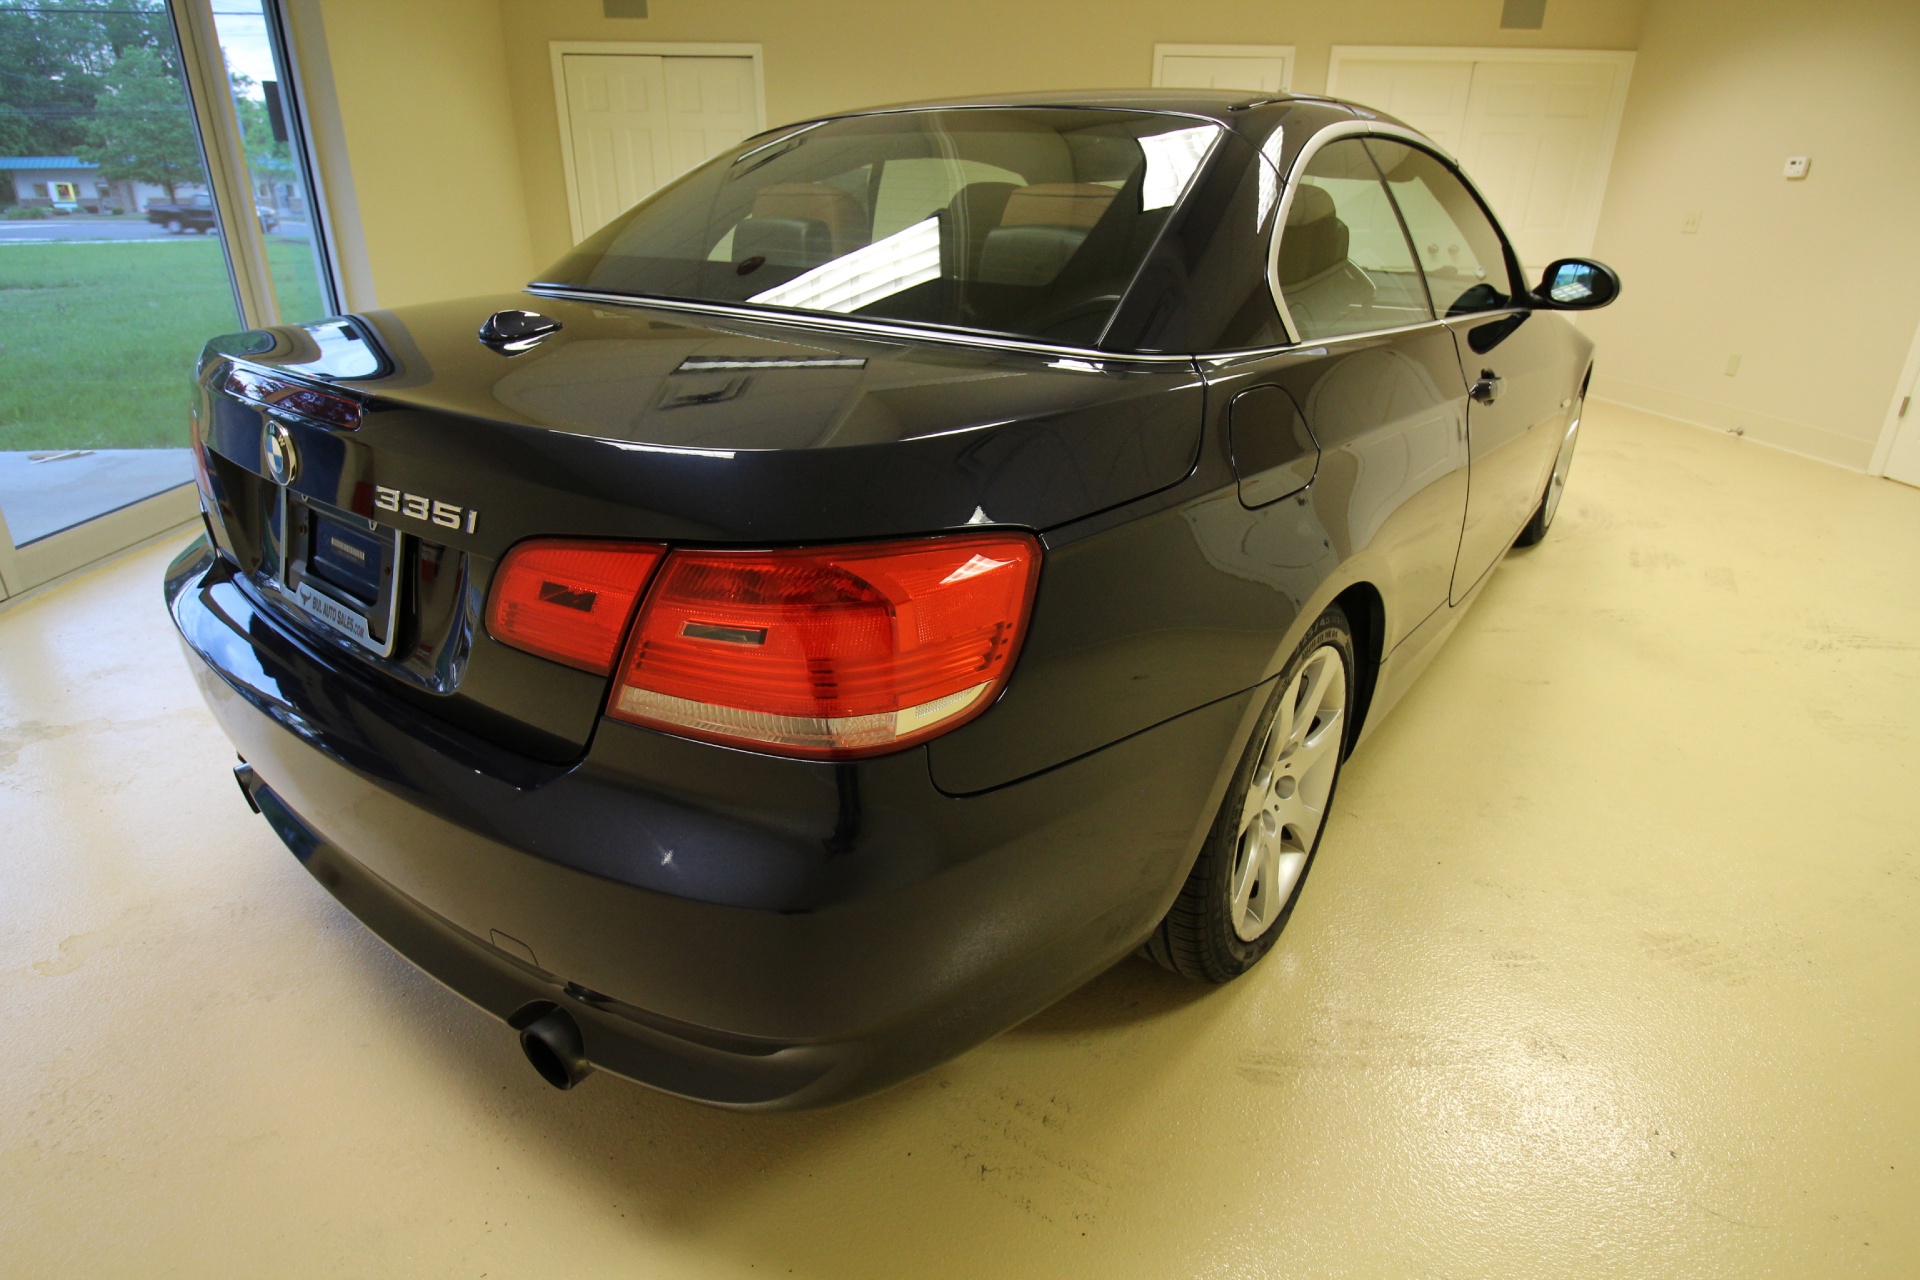 Used 2008 Blue-Metallic BMW 3 Series 335i CONVERTIBLE,PREMIUM PKG,HEATED SEATS,XENONS,BLUETOOTH,COMFORT ACCESS | Albany, NY